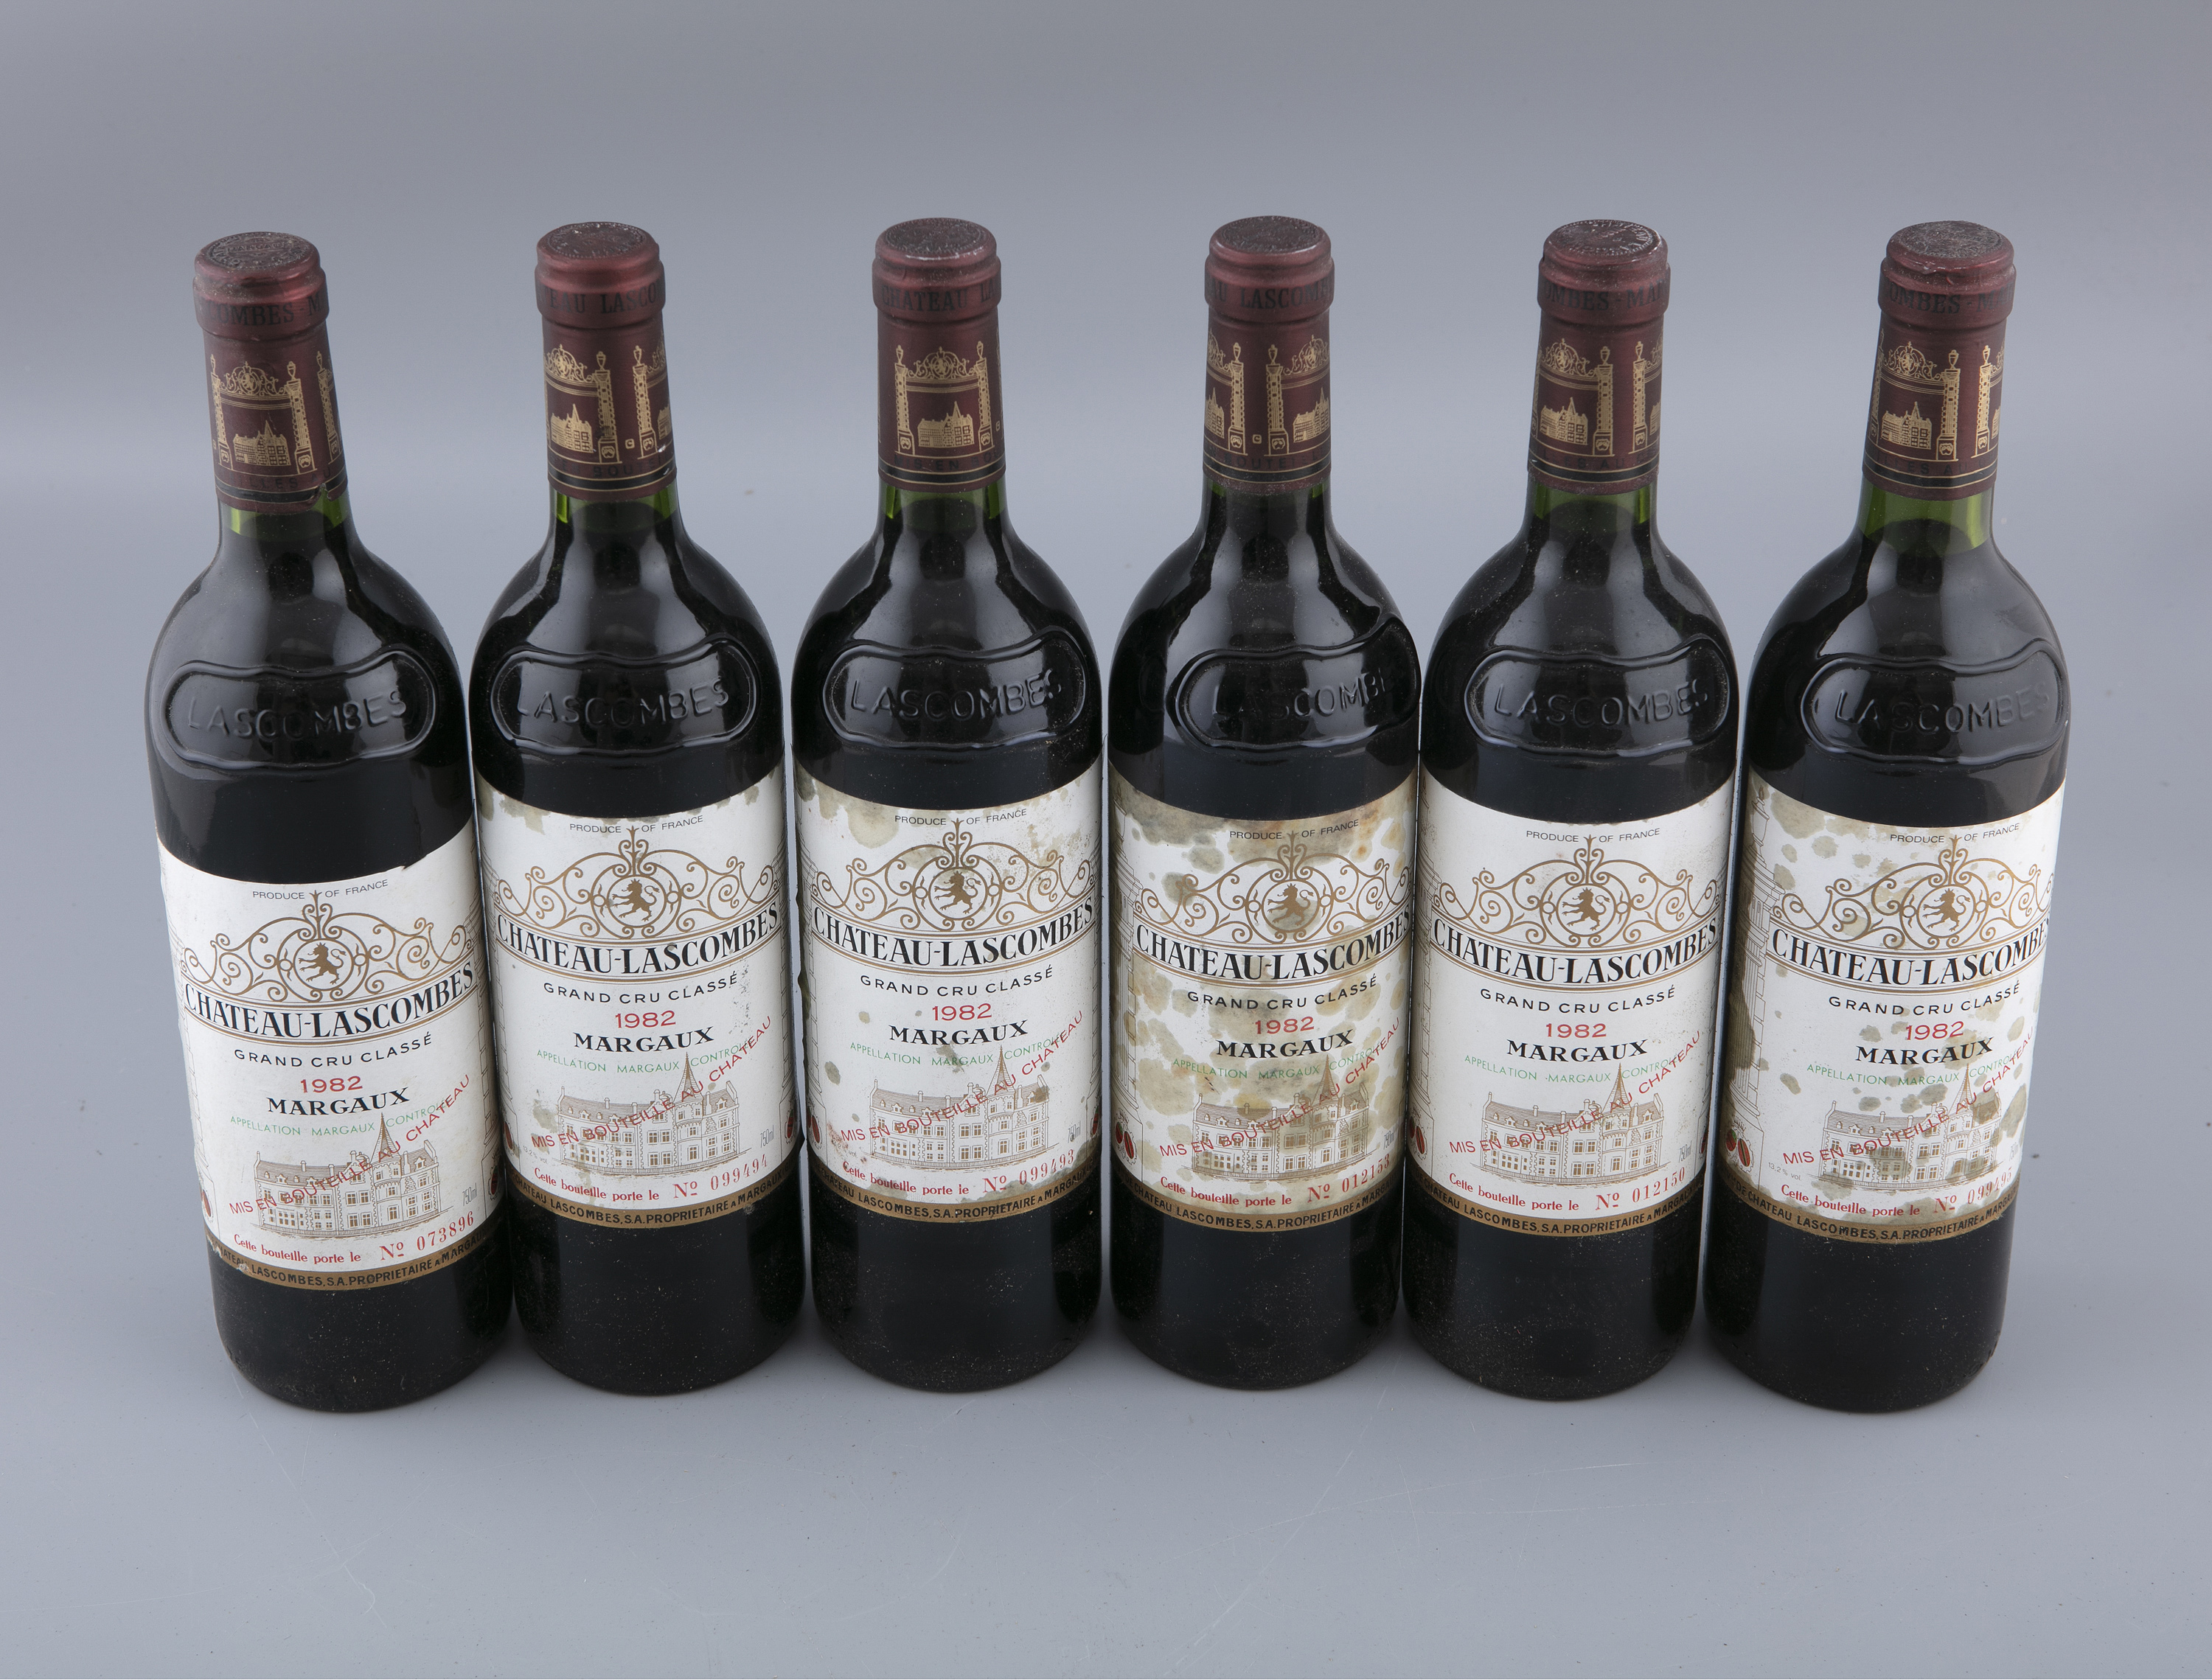 CHATEAUX LASCOMBES Margaux, 1982 Six bottles From the Cellar of Peter White - Image 6 of 7